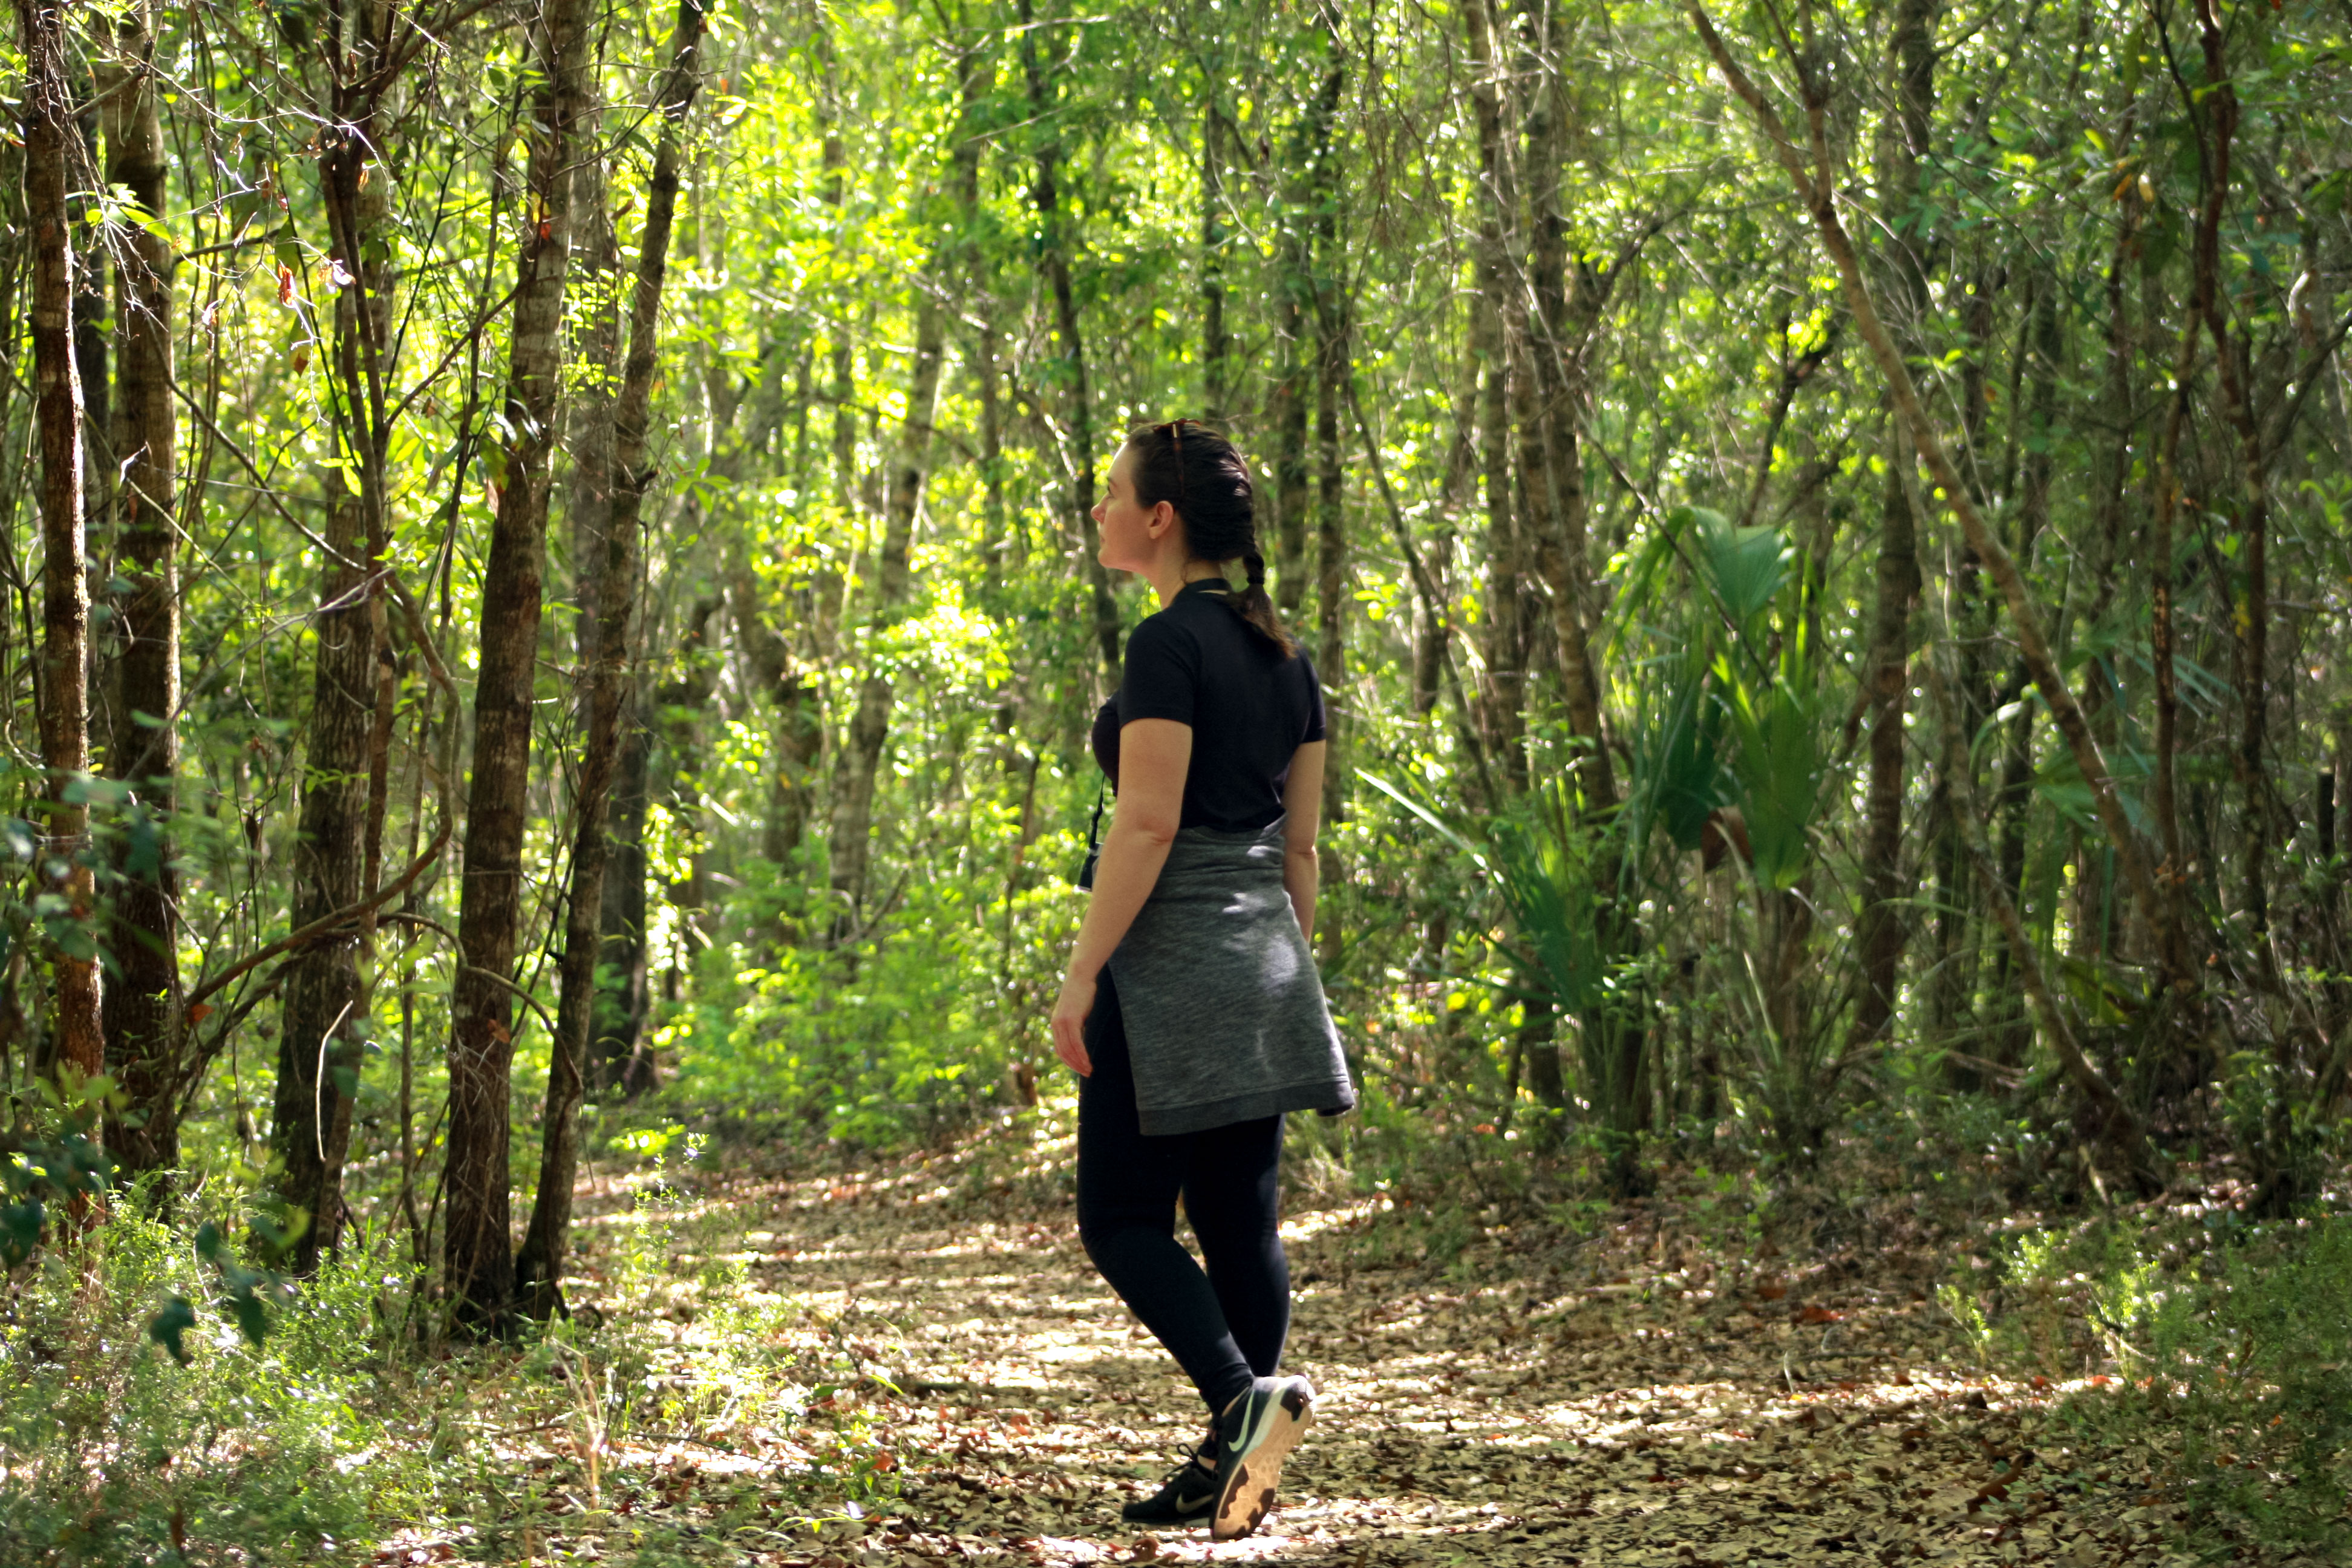 Krystal walking a path in the woods in exercise clothing